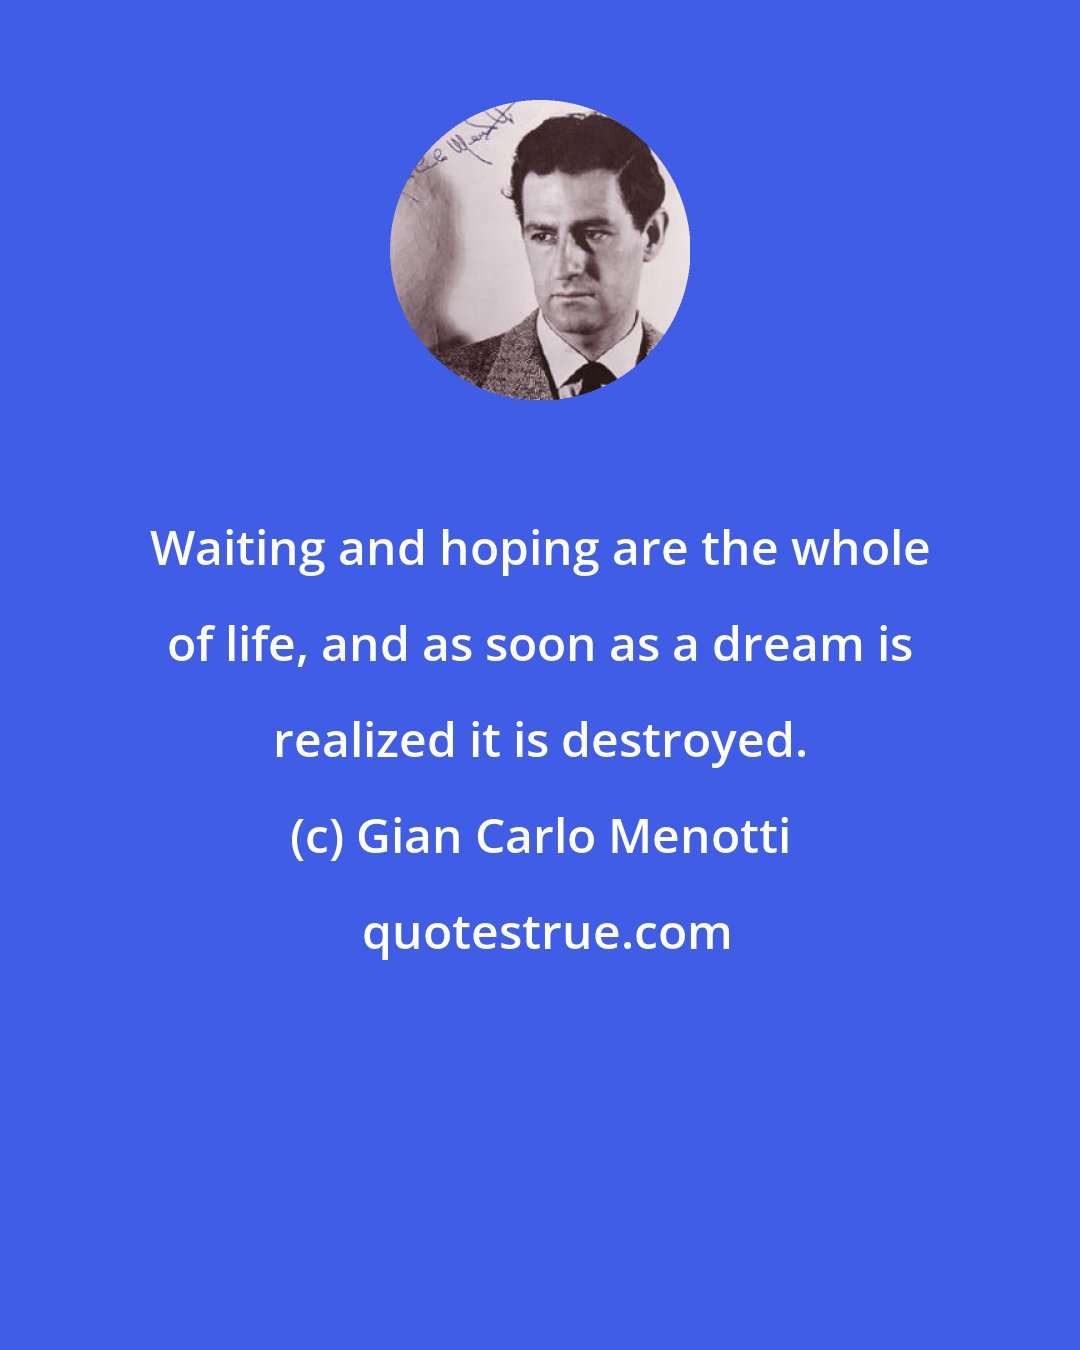 Gian Carlo Menotti: Waiting and hoping are the whole of life, and as soon as a dream is realized it is destroyed.